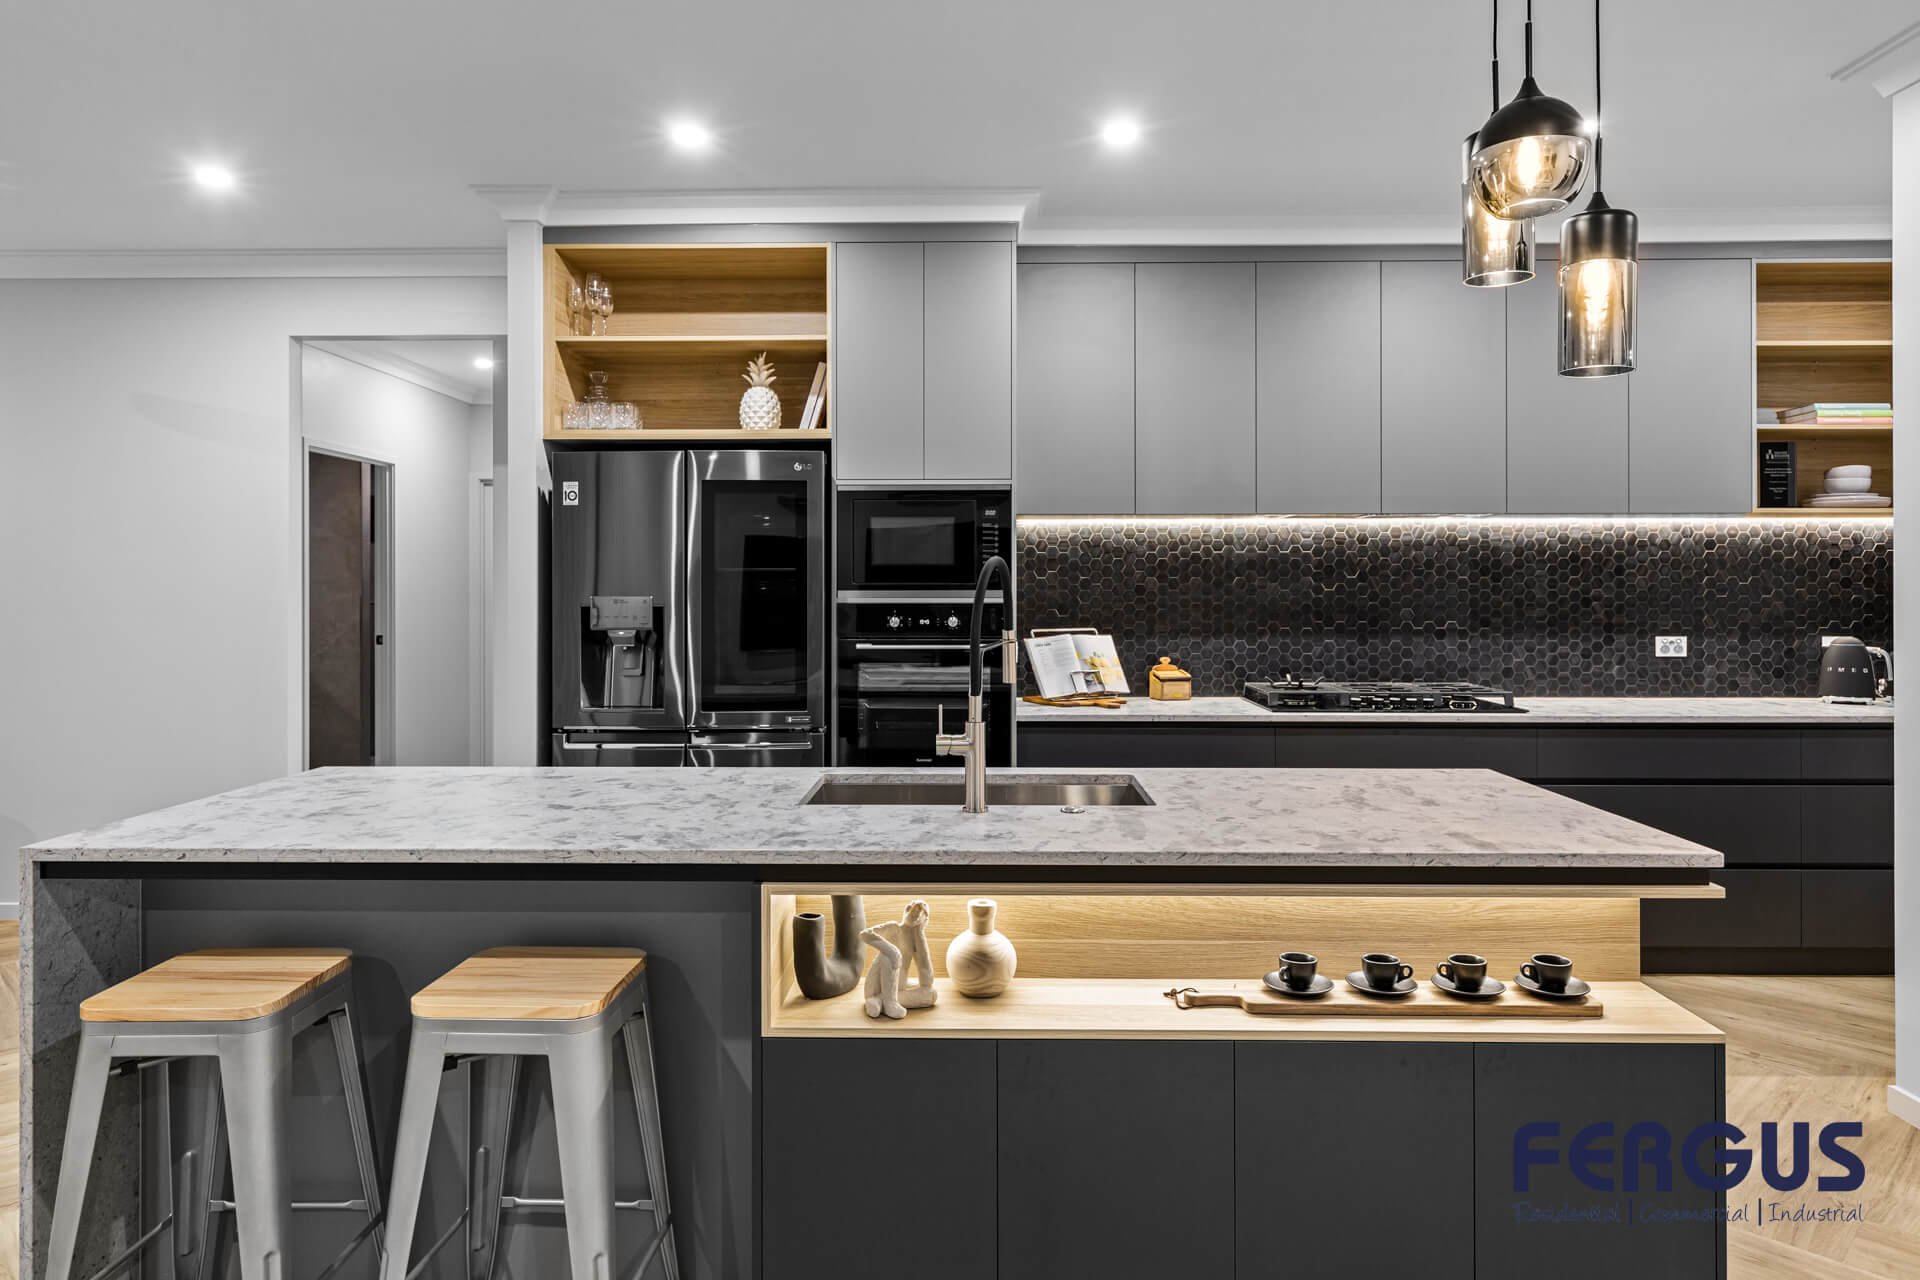 Palmview 255 Residential Kitchen & Dining Area design showcasing a seamlessly integrated built-in cabinet & island table by Fergus Builders Residential, Industrial & Commercial real estate development Mackay